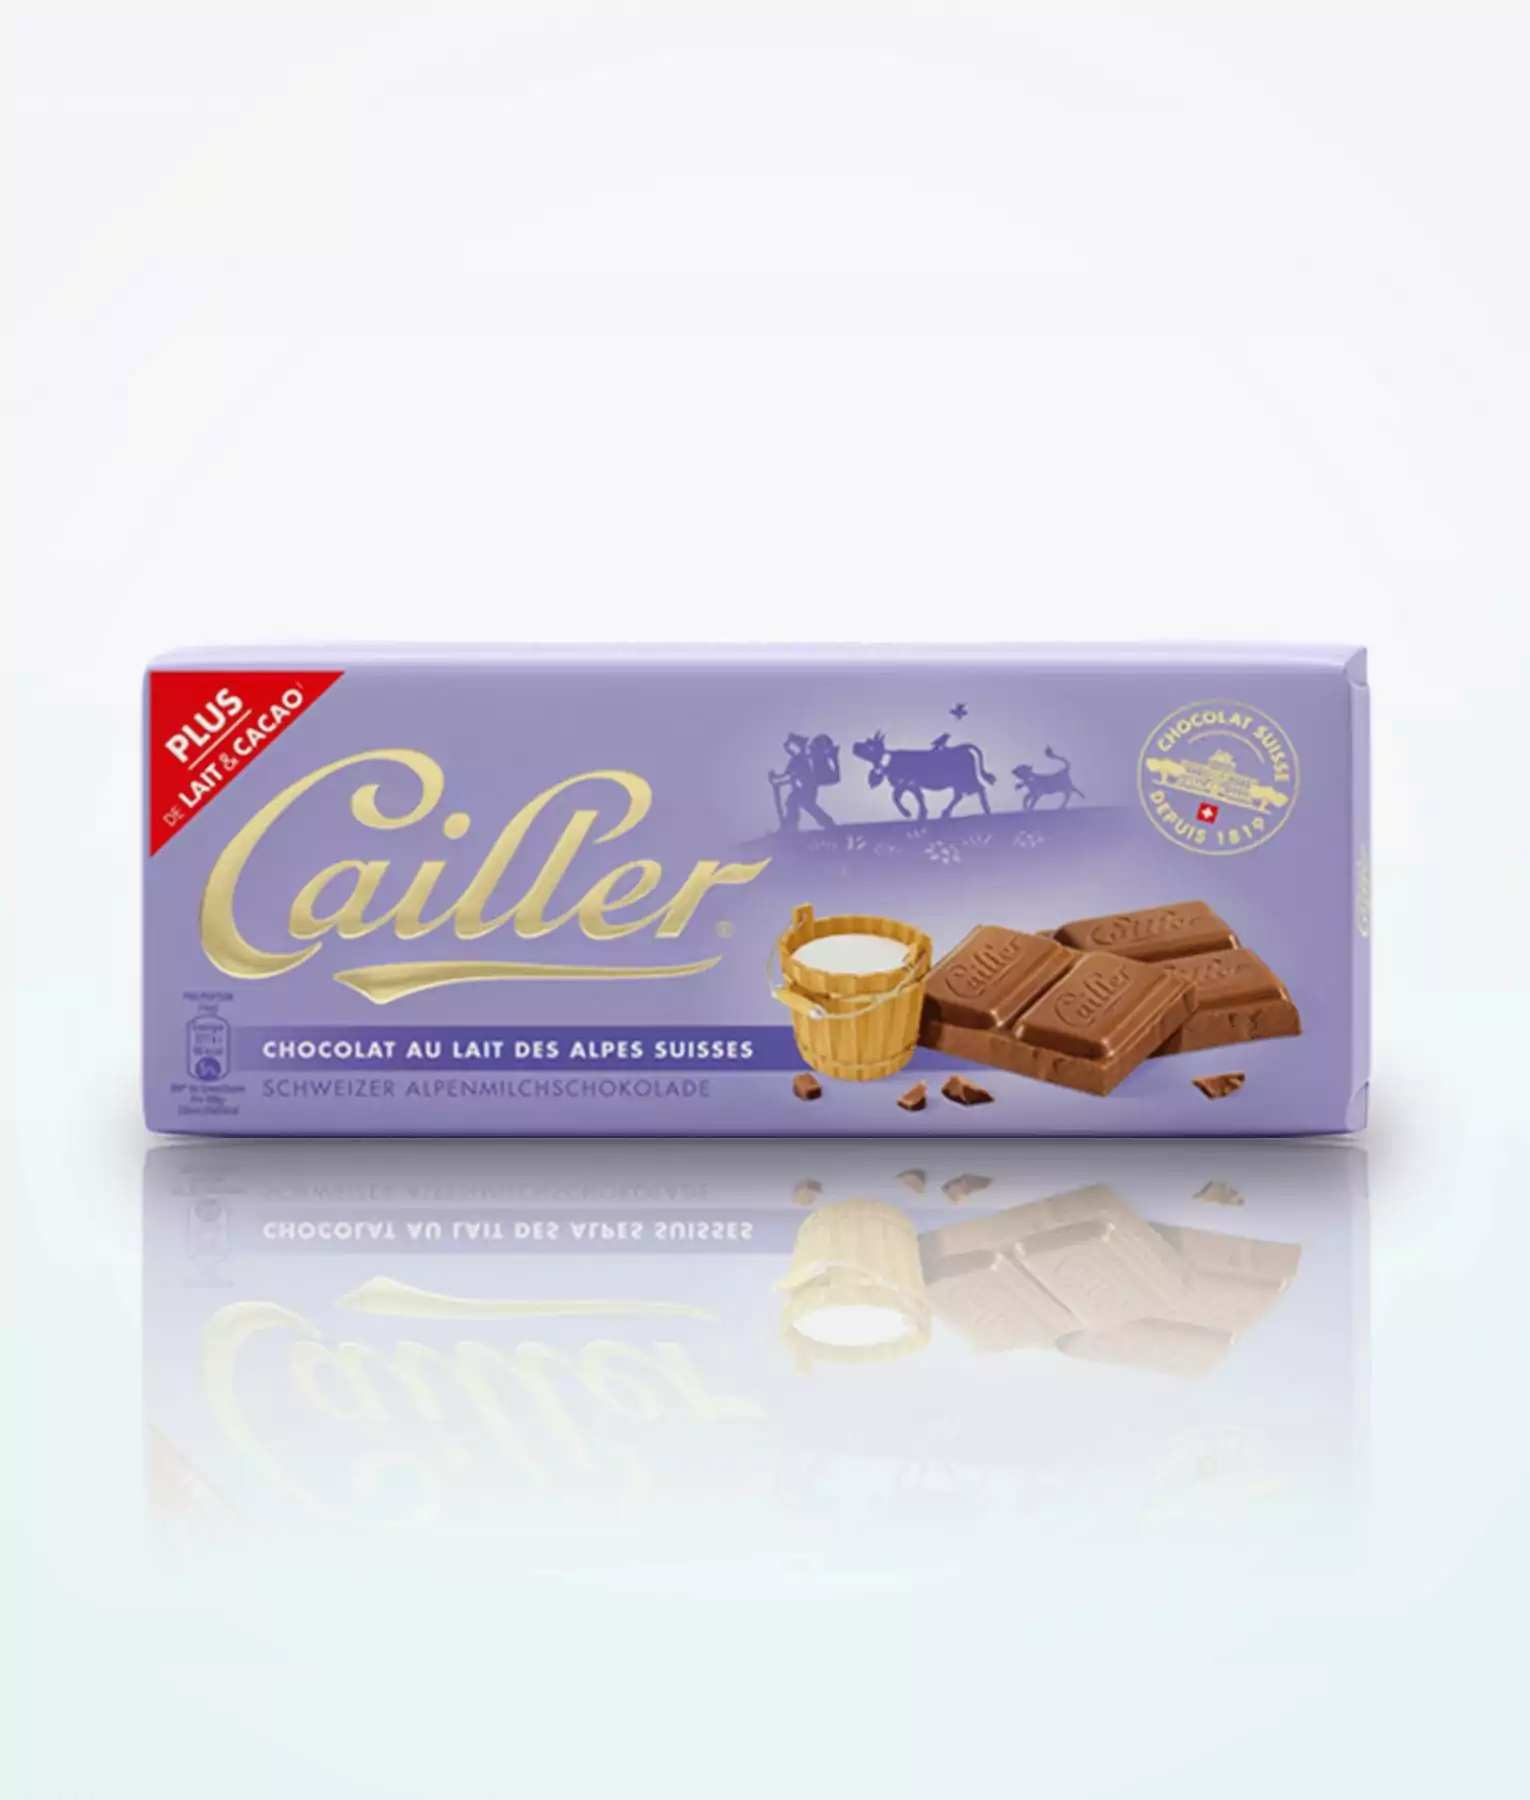 Cailler chocolate